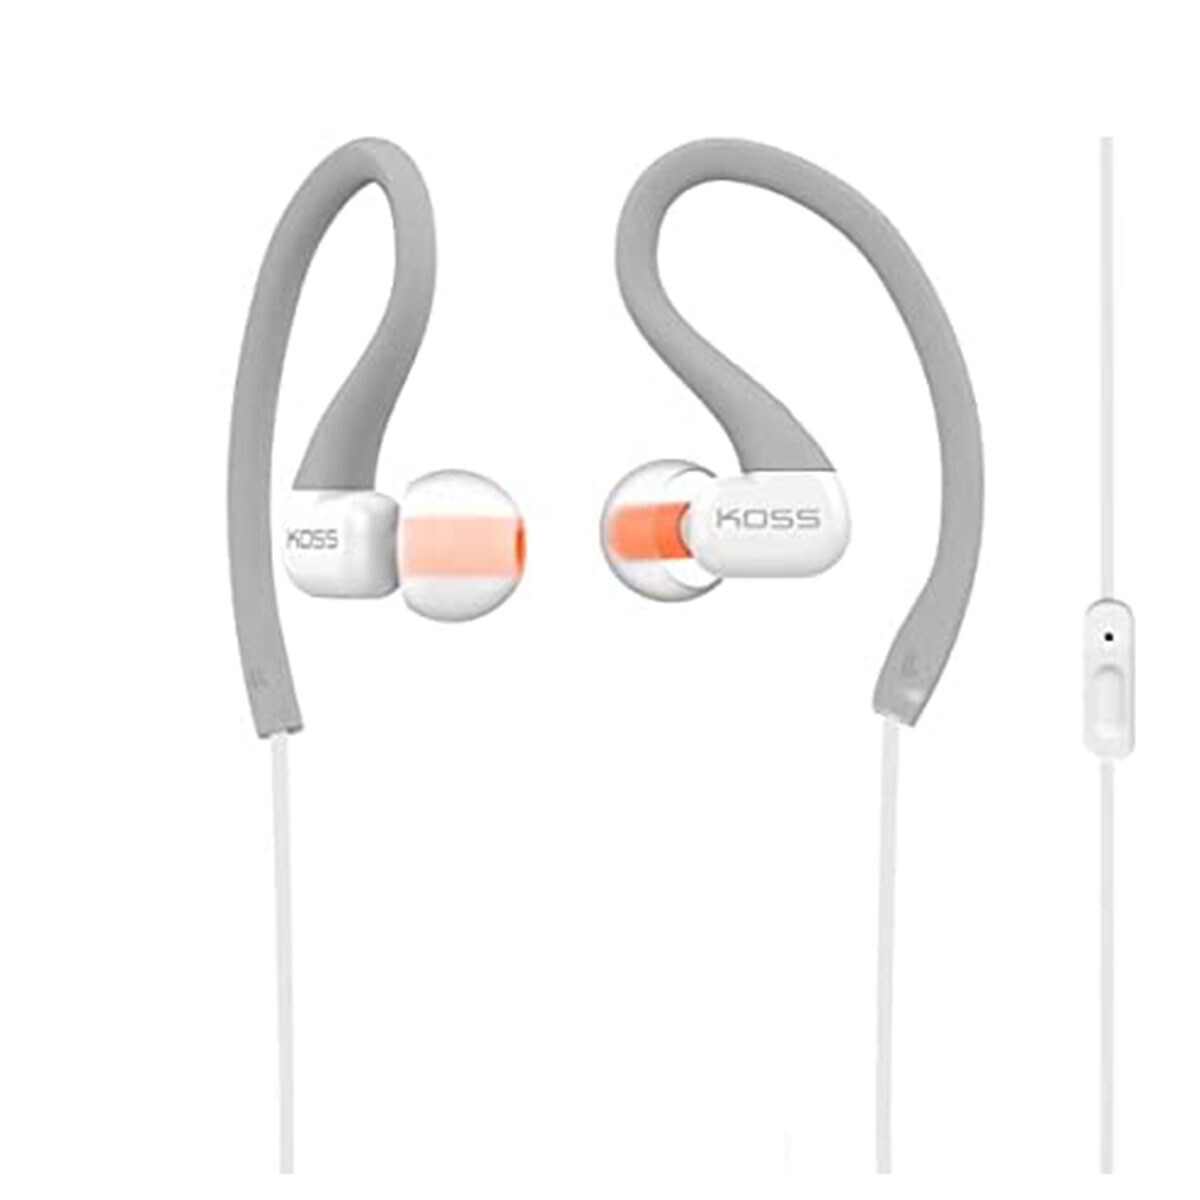 AURICULARES KOSS KSC32IGRY ABS GRIS 